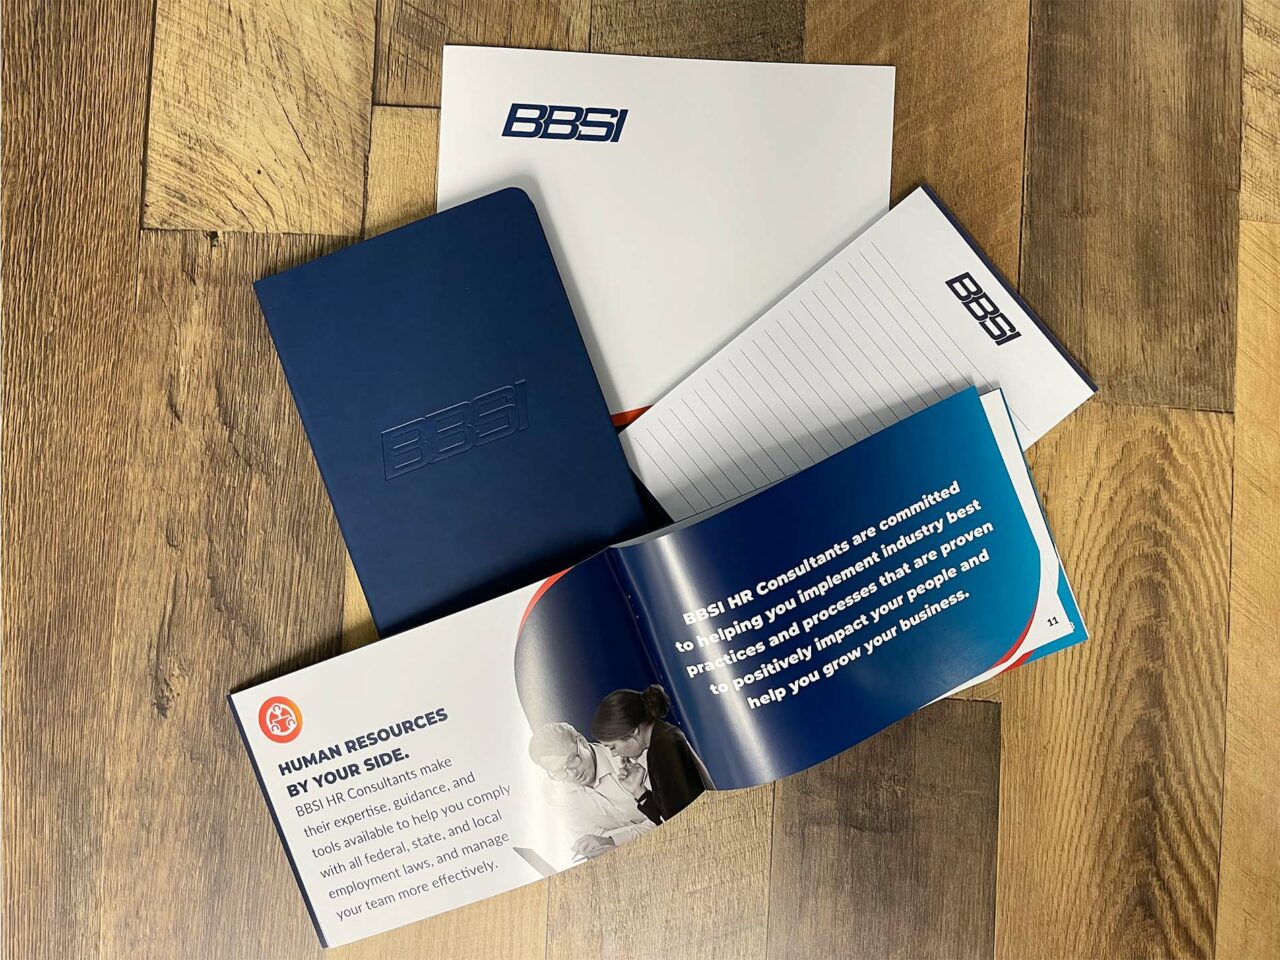 Example of Morel's print capabilities, showing a branded folder, notepad, notebook, and booklet for their client, BBSI.